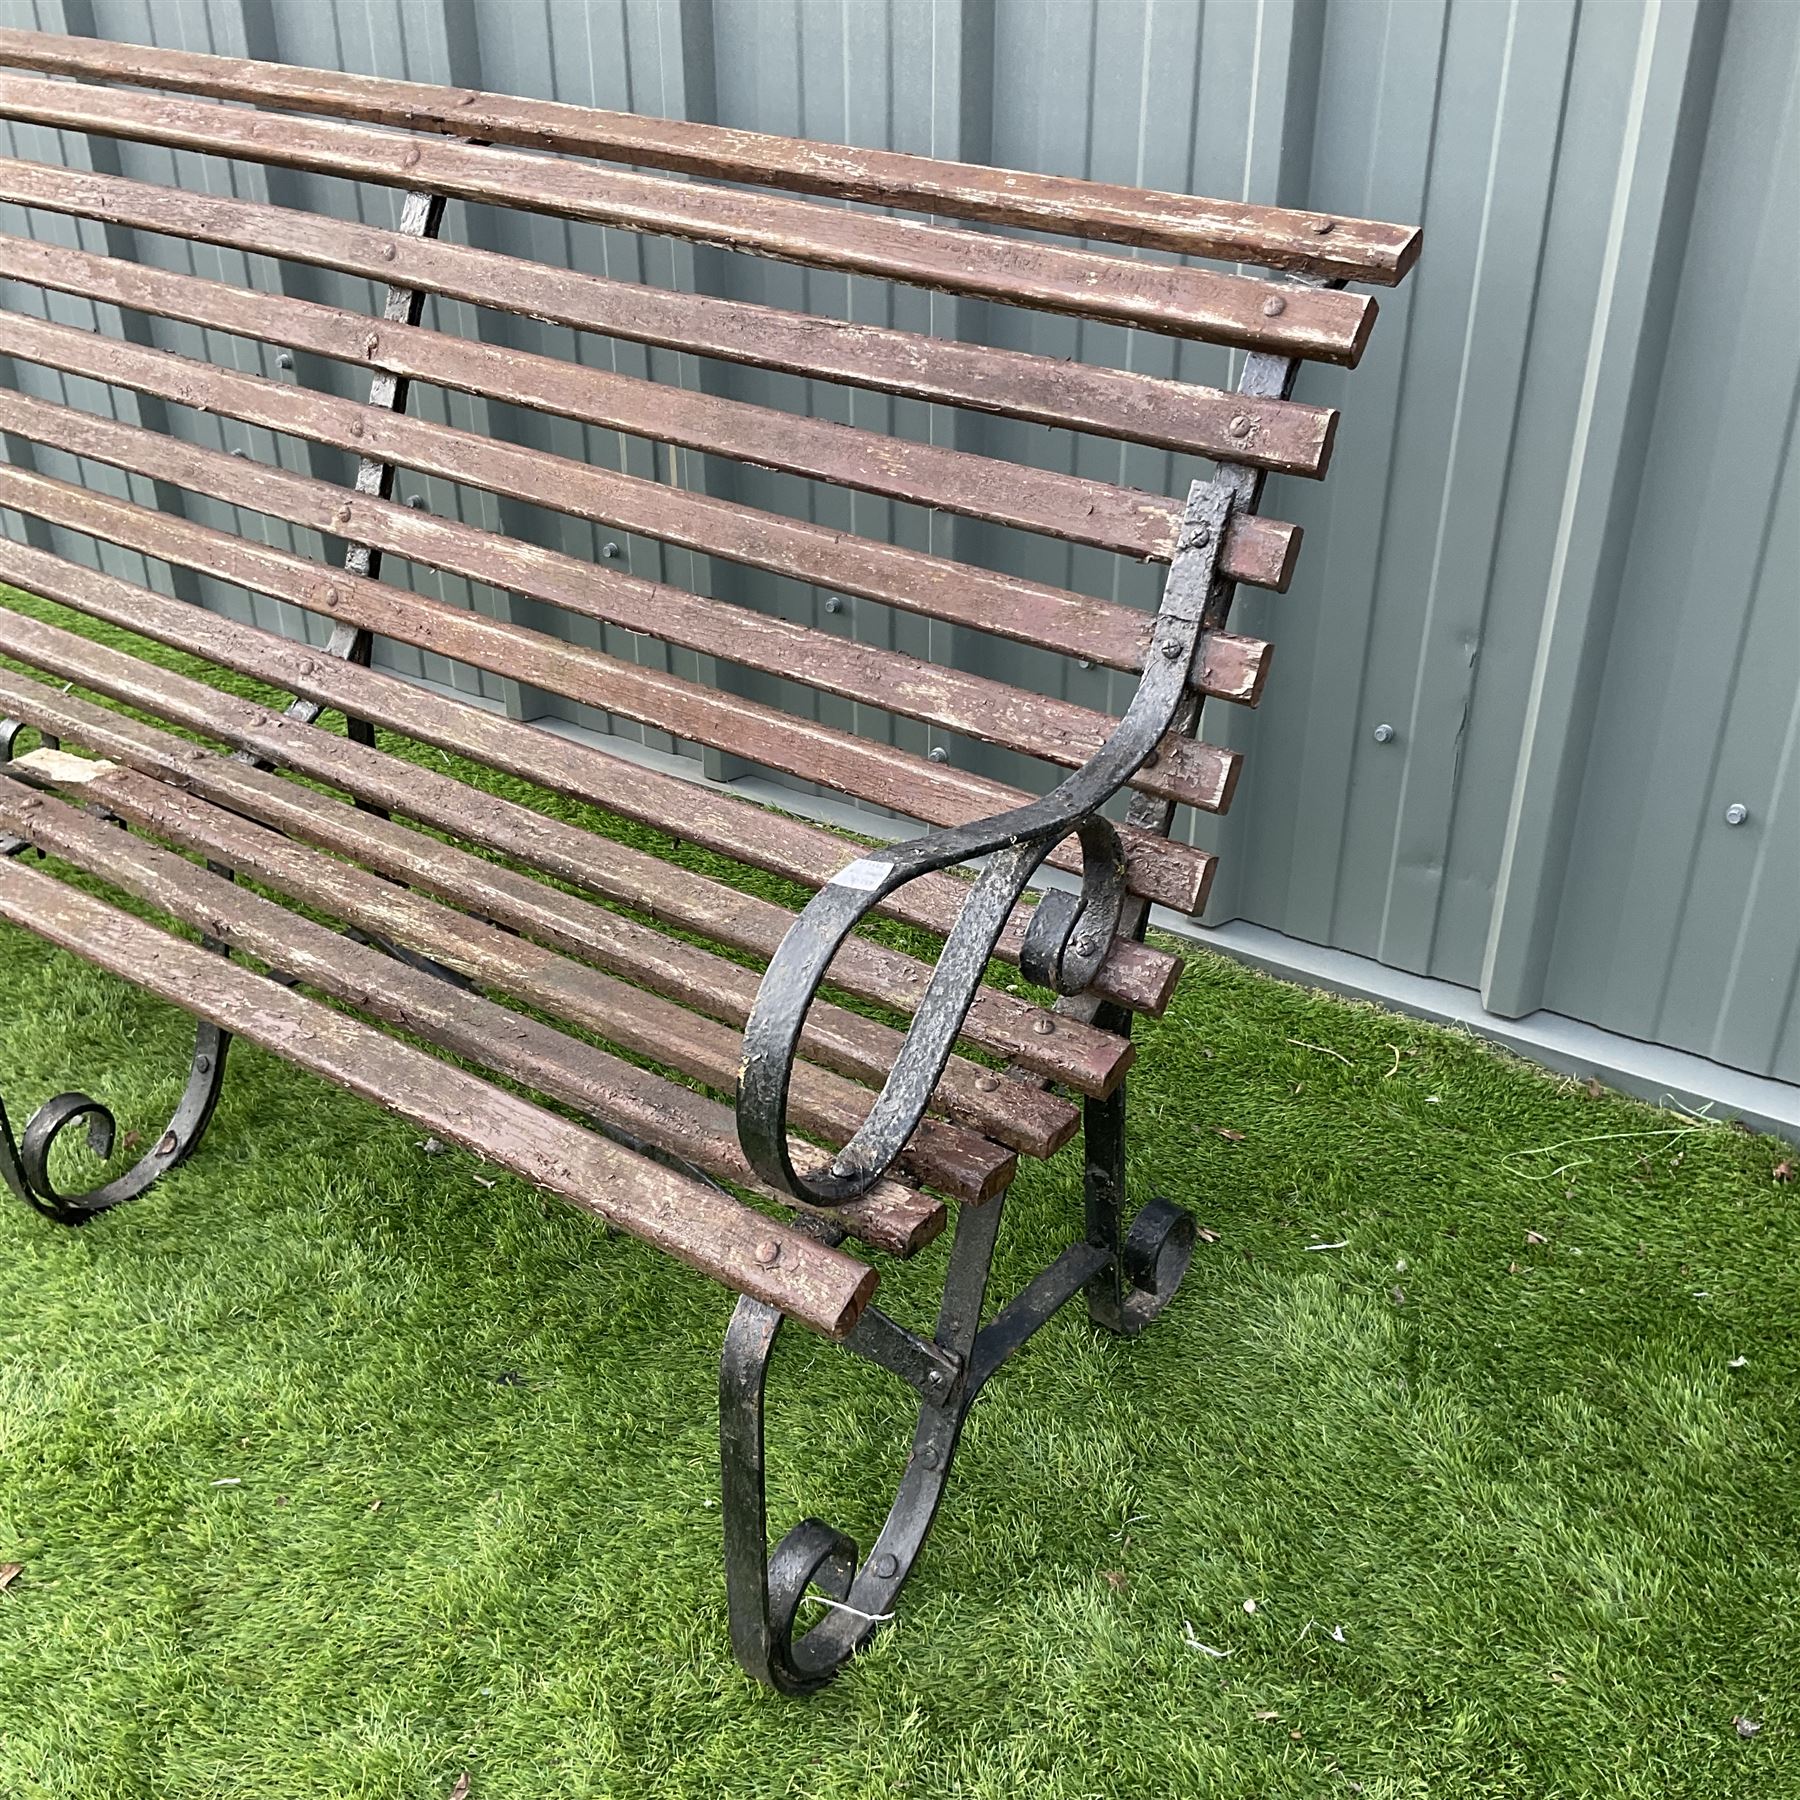 Metal and wood slatted garden bench - Image 2 of 4